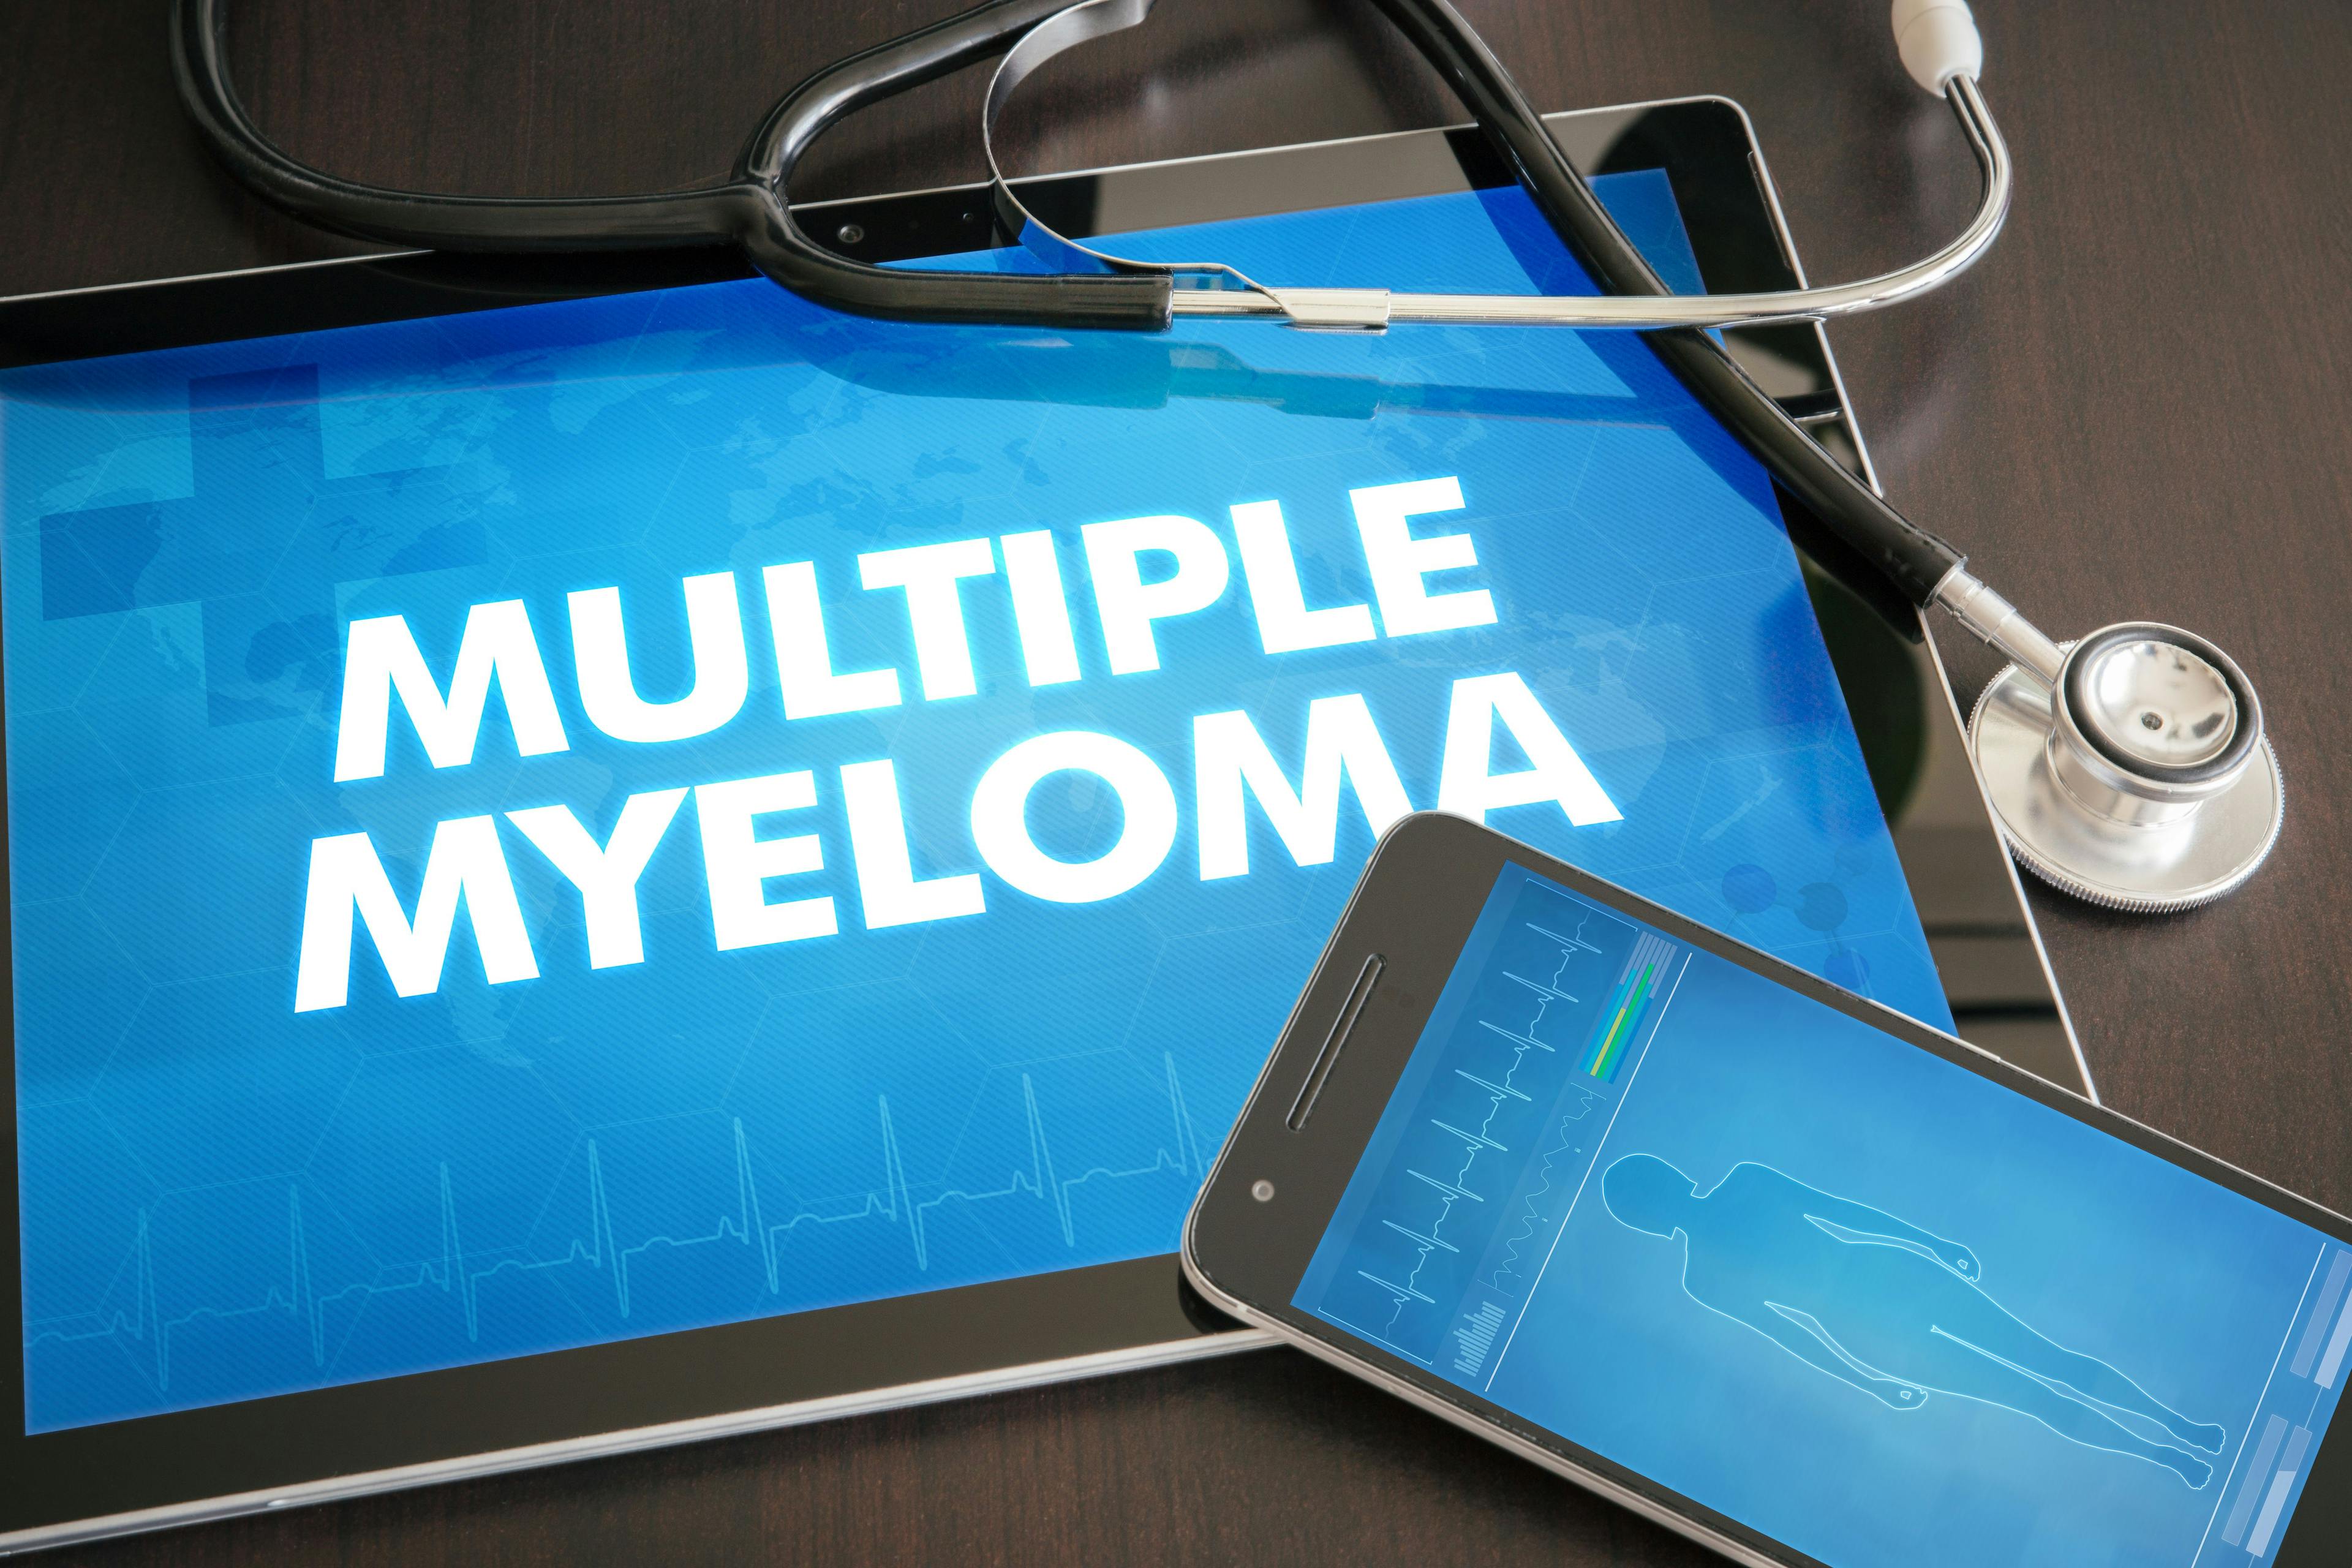 A Look at Multiple Myeloma Treatment Options in the Pipeline